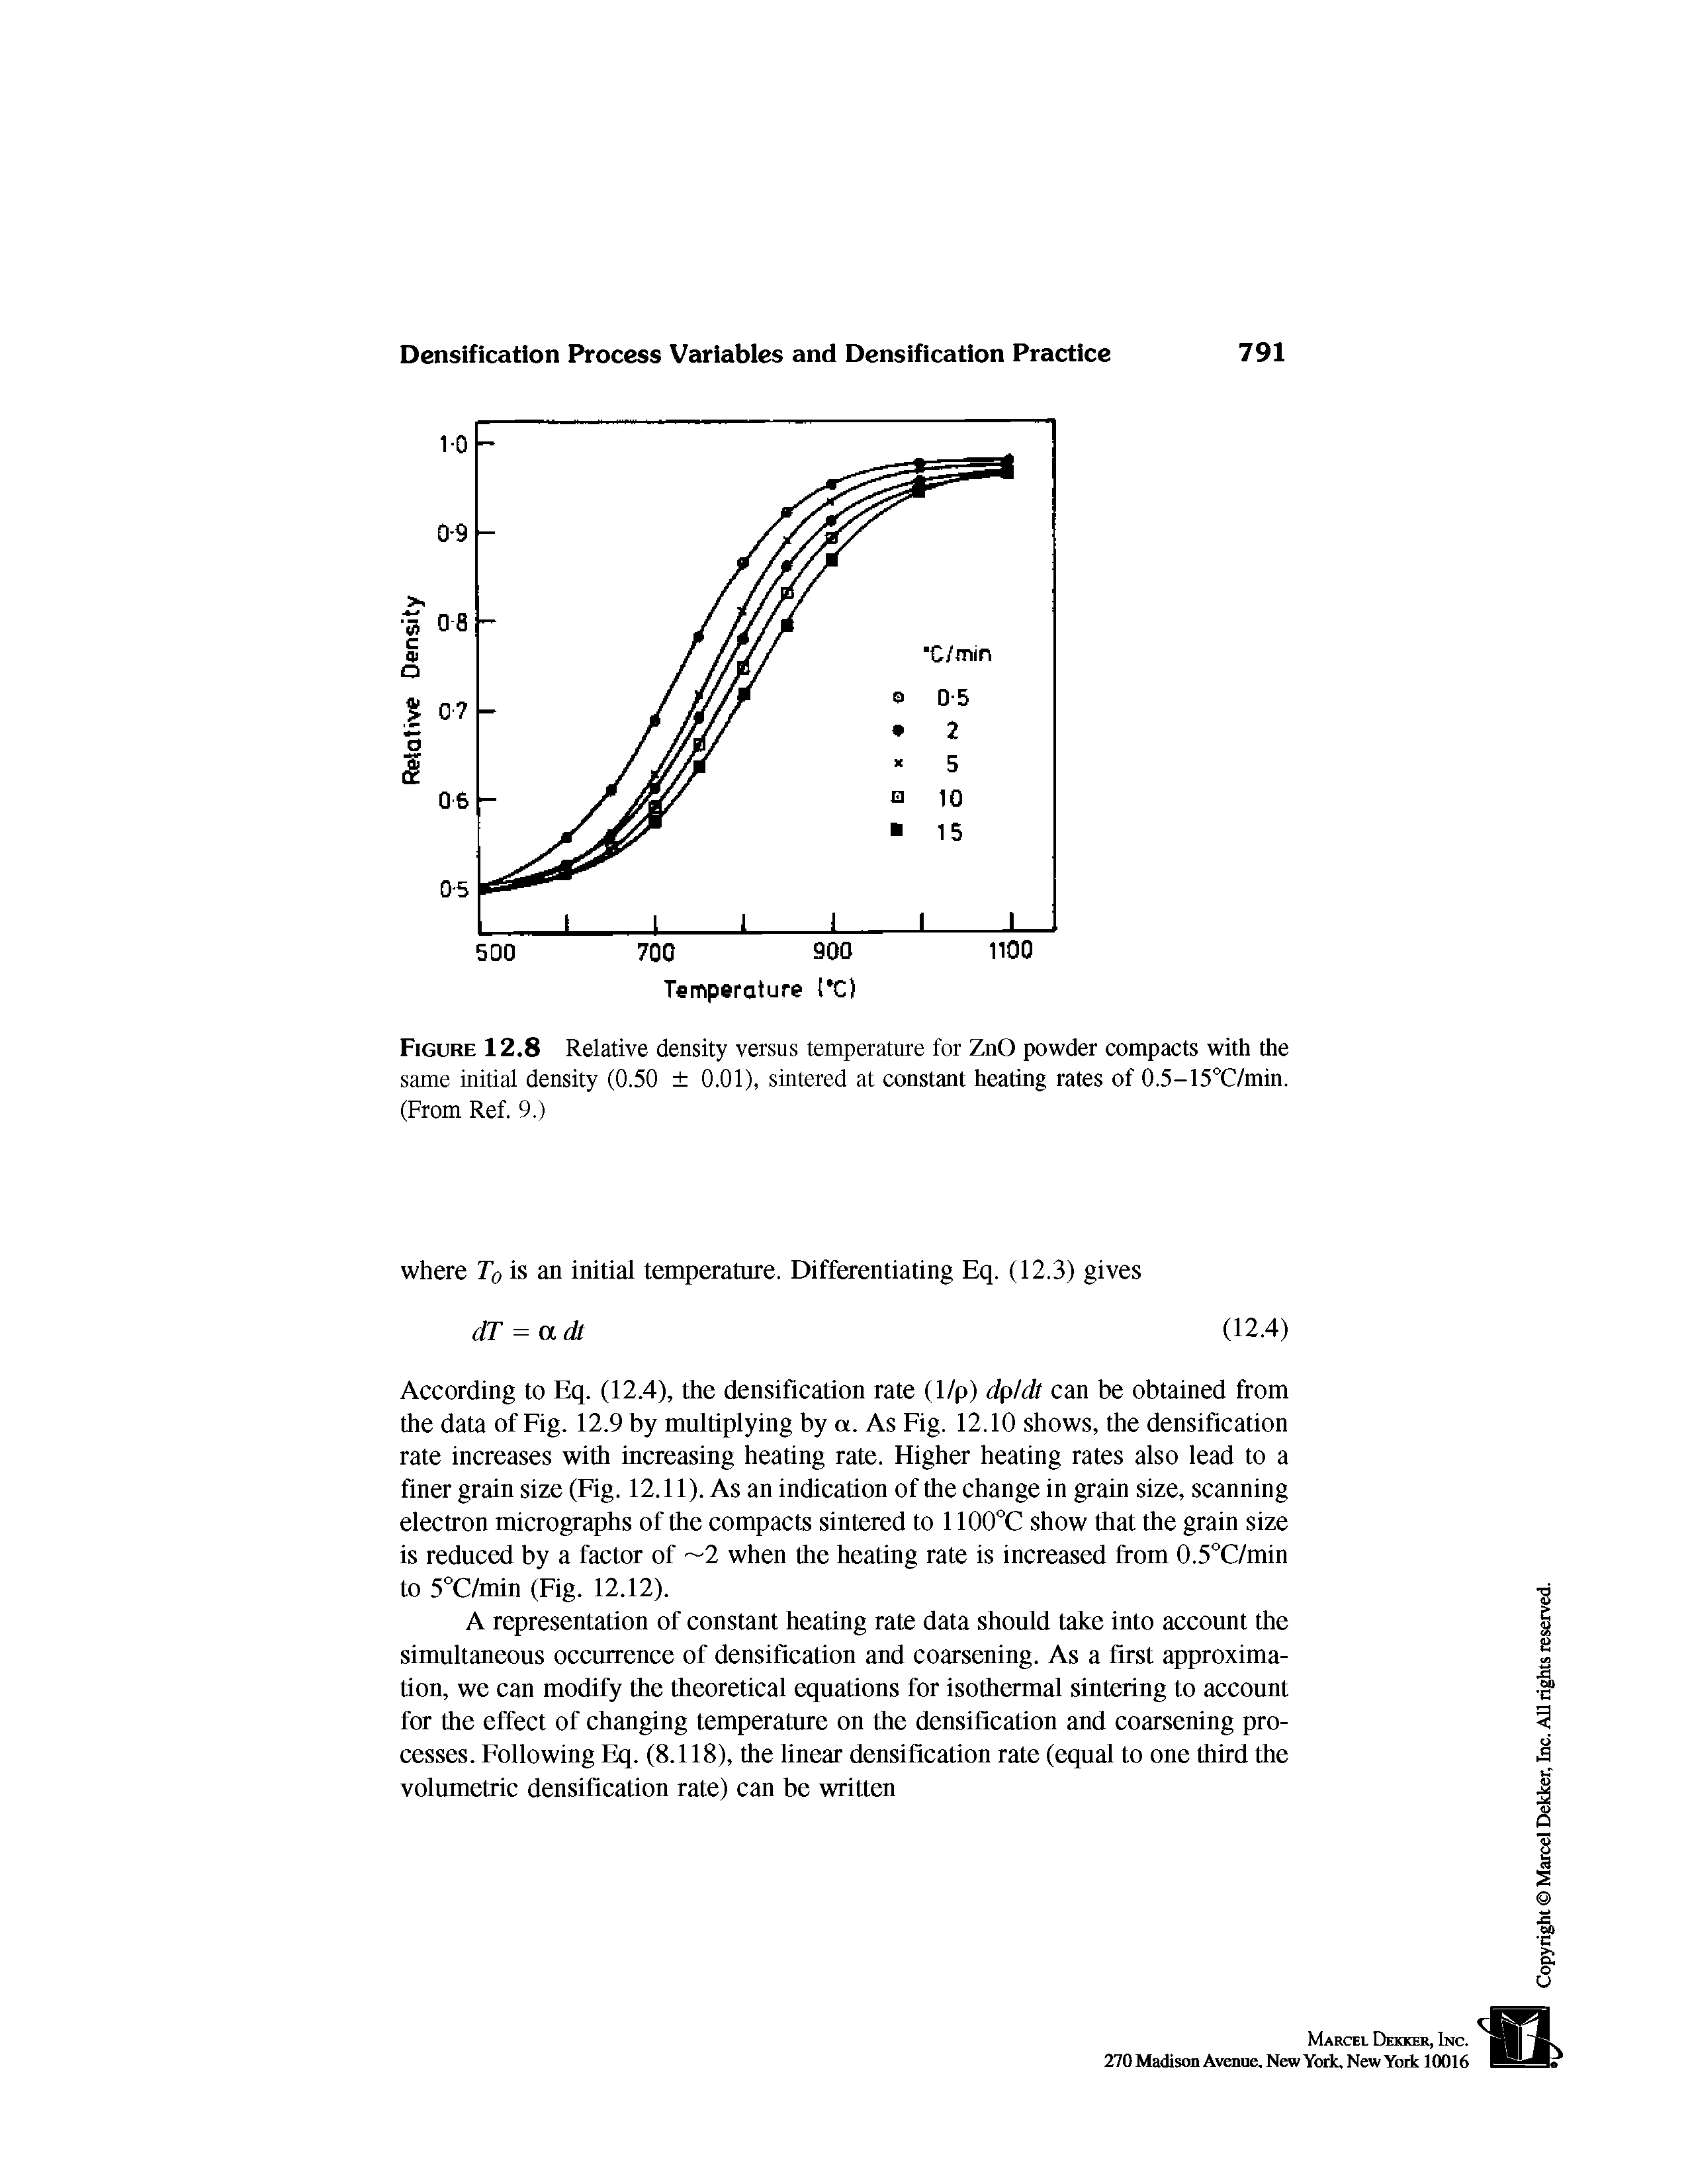 Figure 12.8 Relative density versus temperature for ZnO powder compacts with the same initial density (0.50 0.01), sintered at constant heating rates of 0.5-15T/min. (From Ref. 9.)...